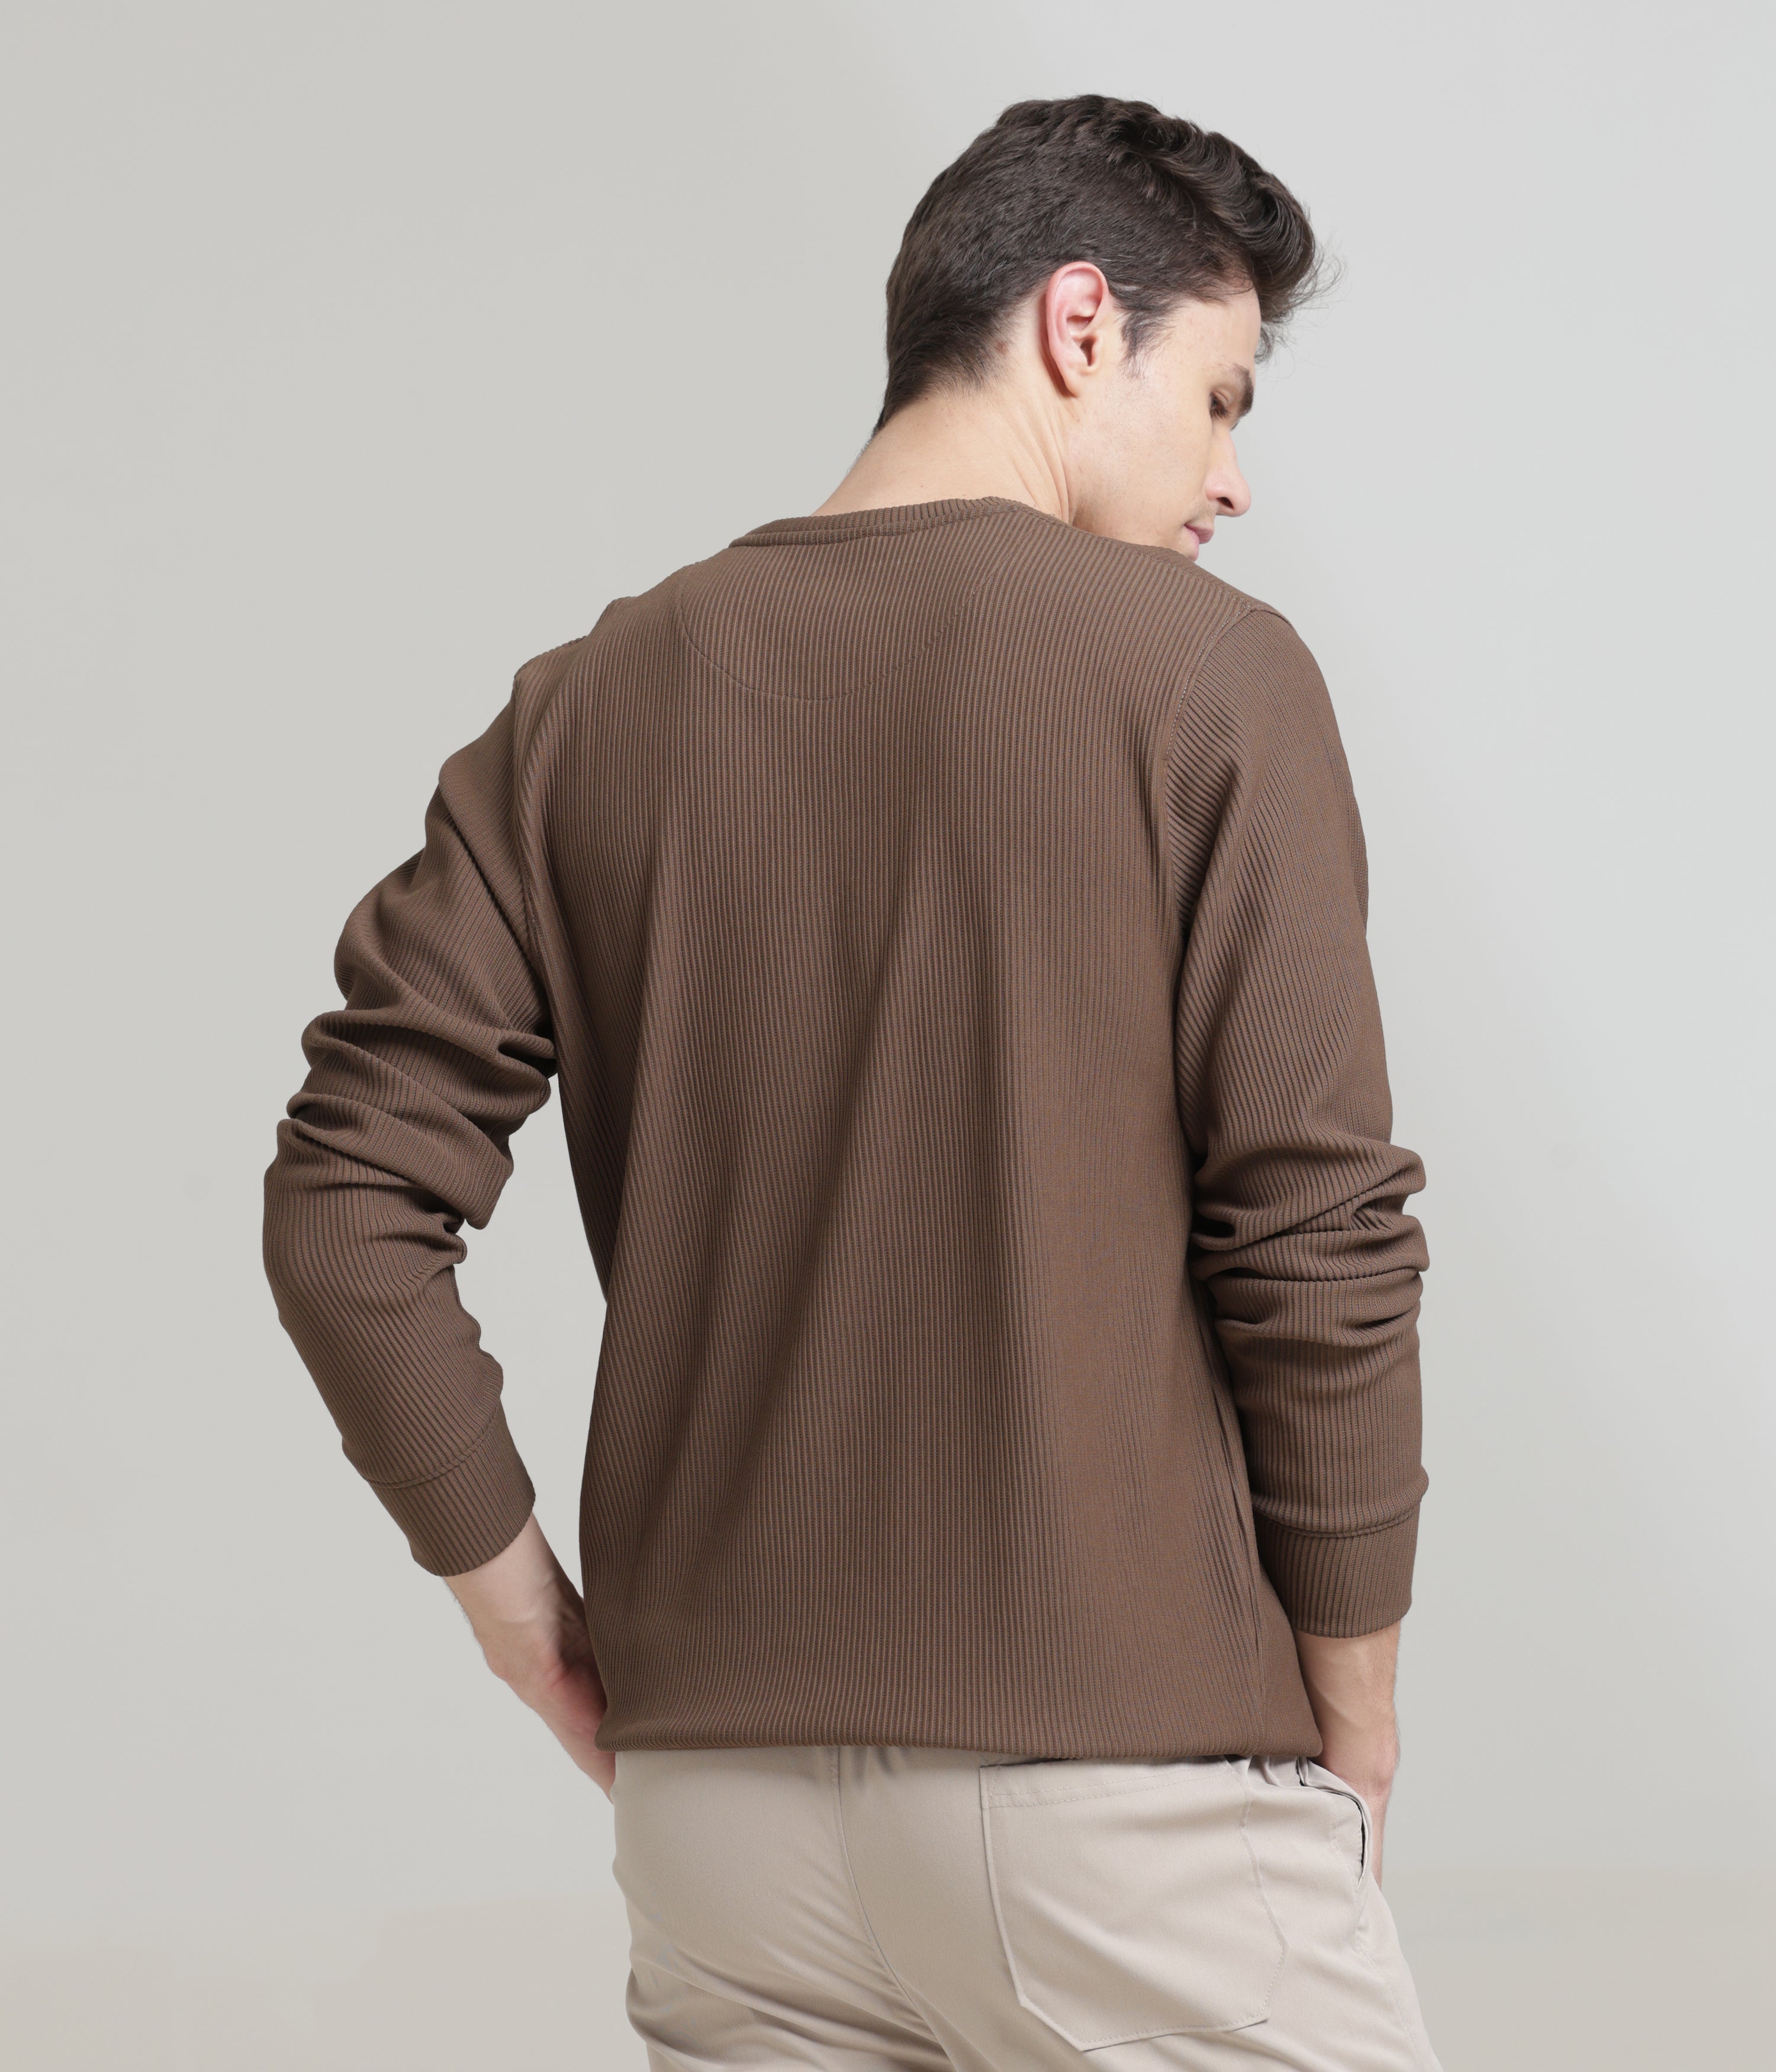 Brown Regular Fit Sweatshirt: Cozy, Casual Comfort for Chilly Days